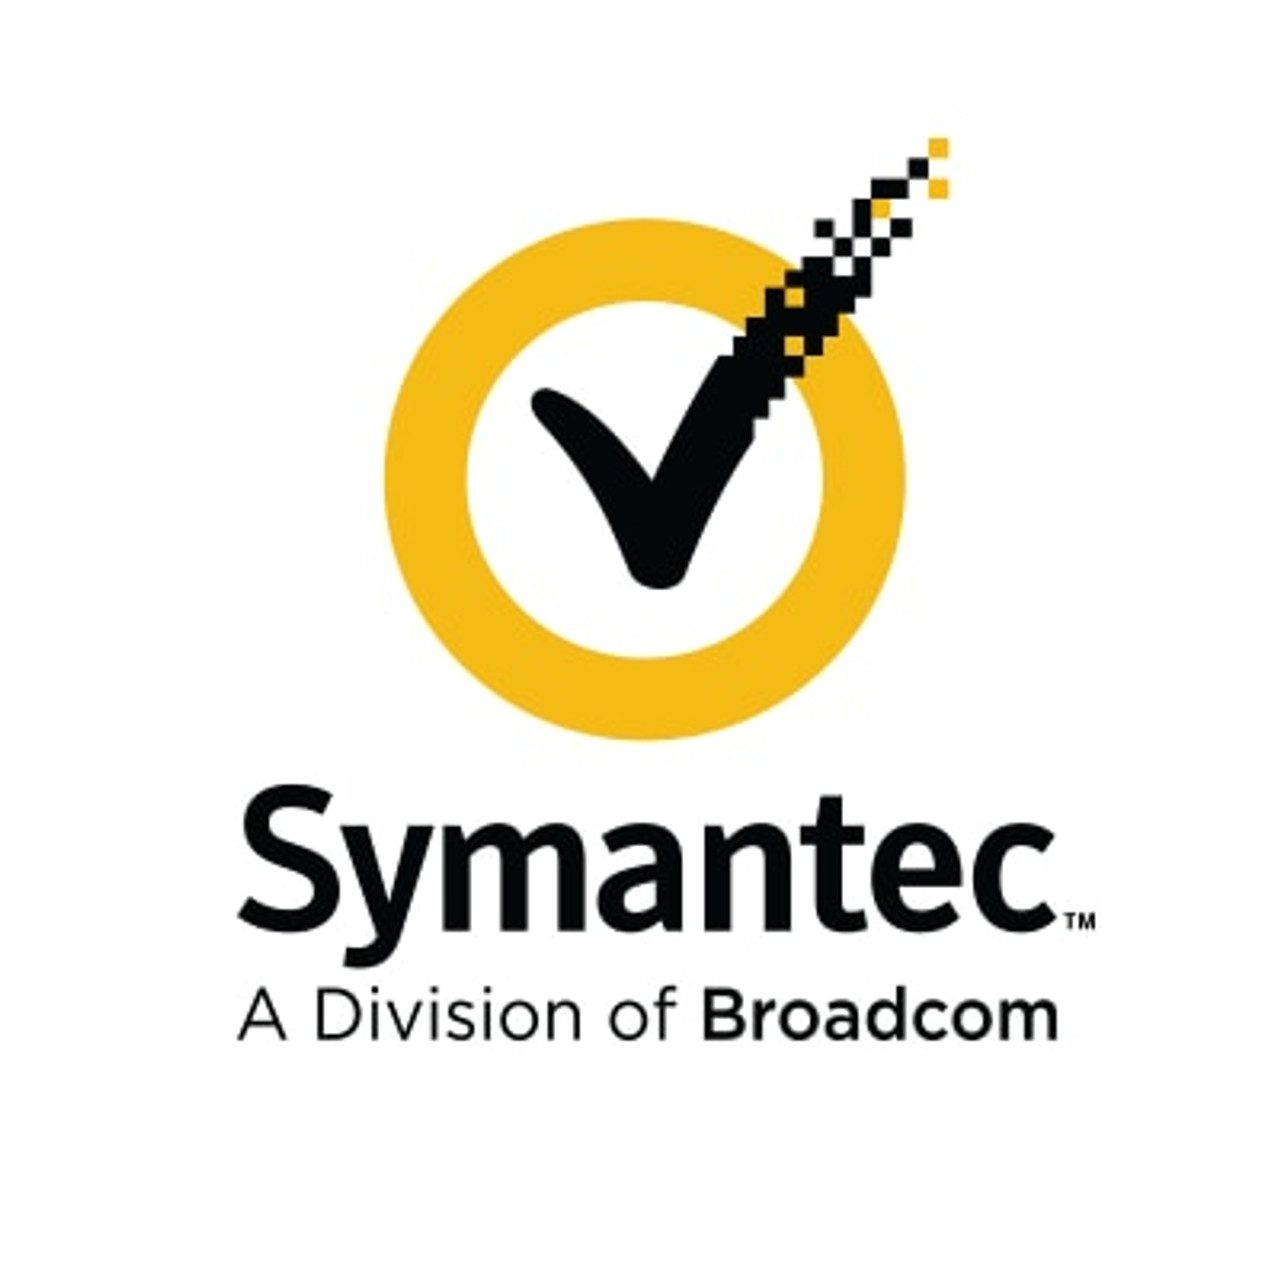 Symantec Complete Endpoint Defense (without SEP), Initial Hybrid Subscription License with Support, 100-249 Devices 1 YR